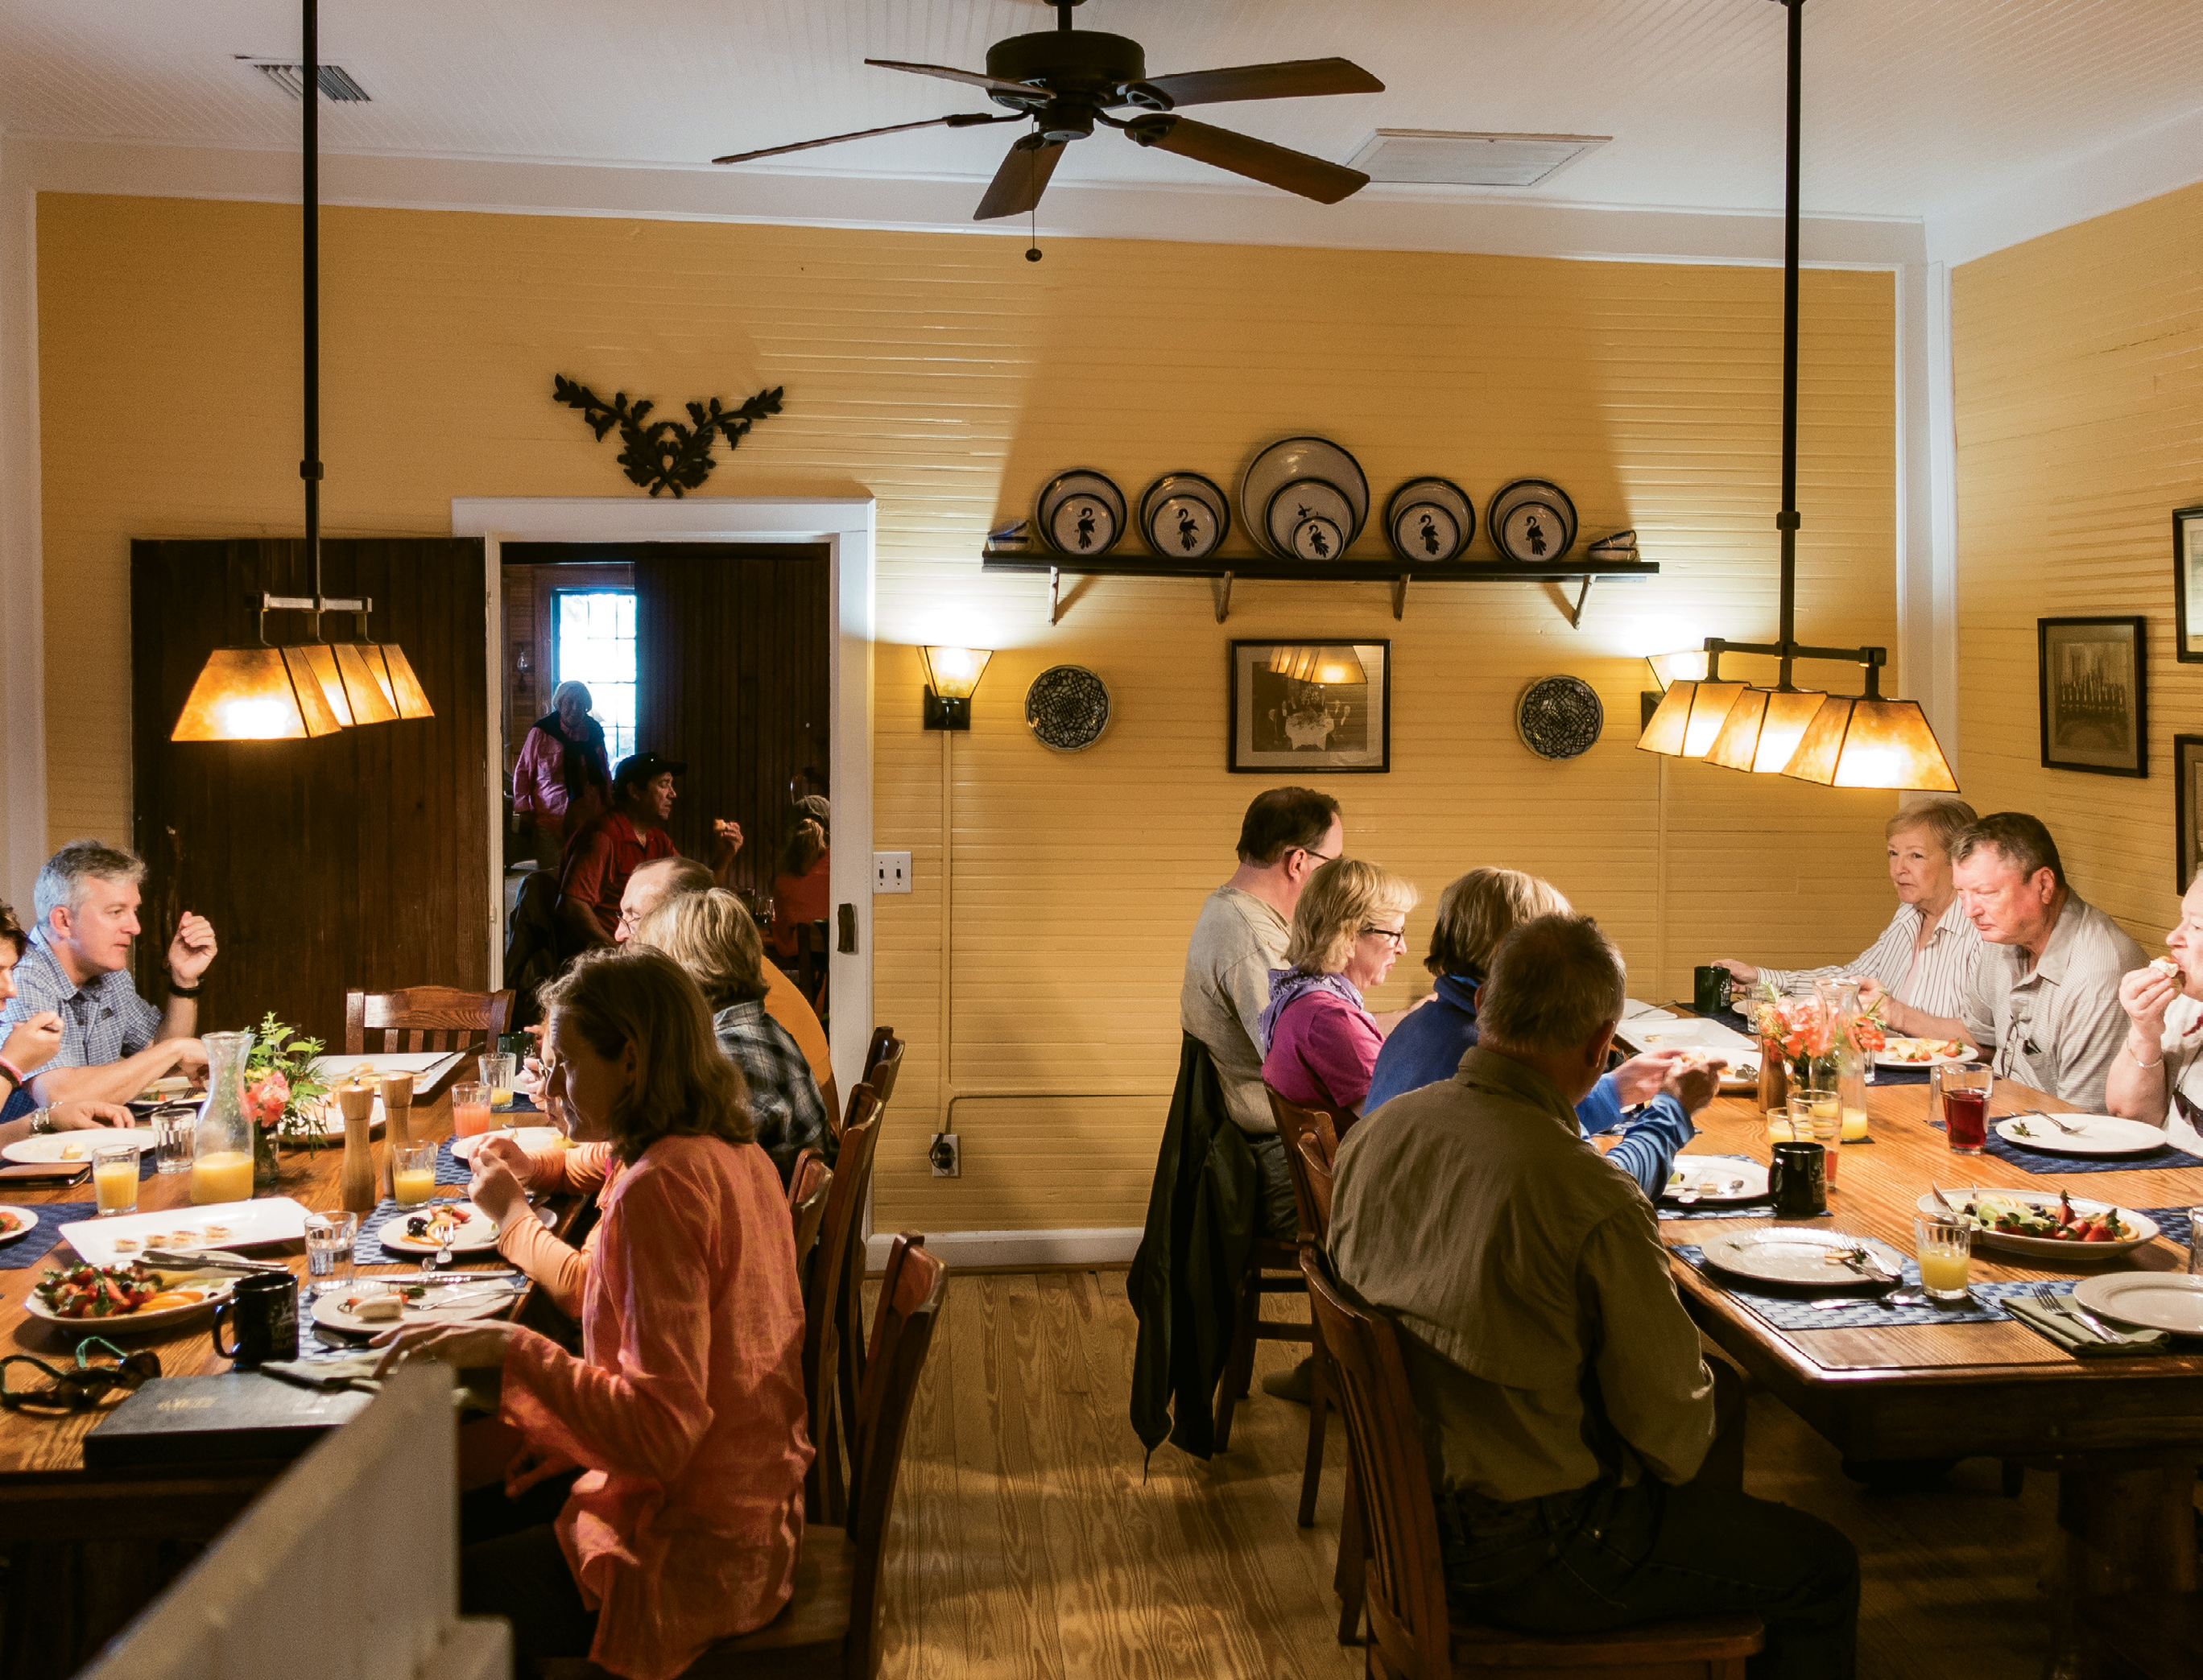 Family-style dining at the lodge.